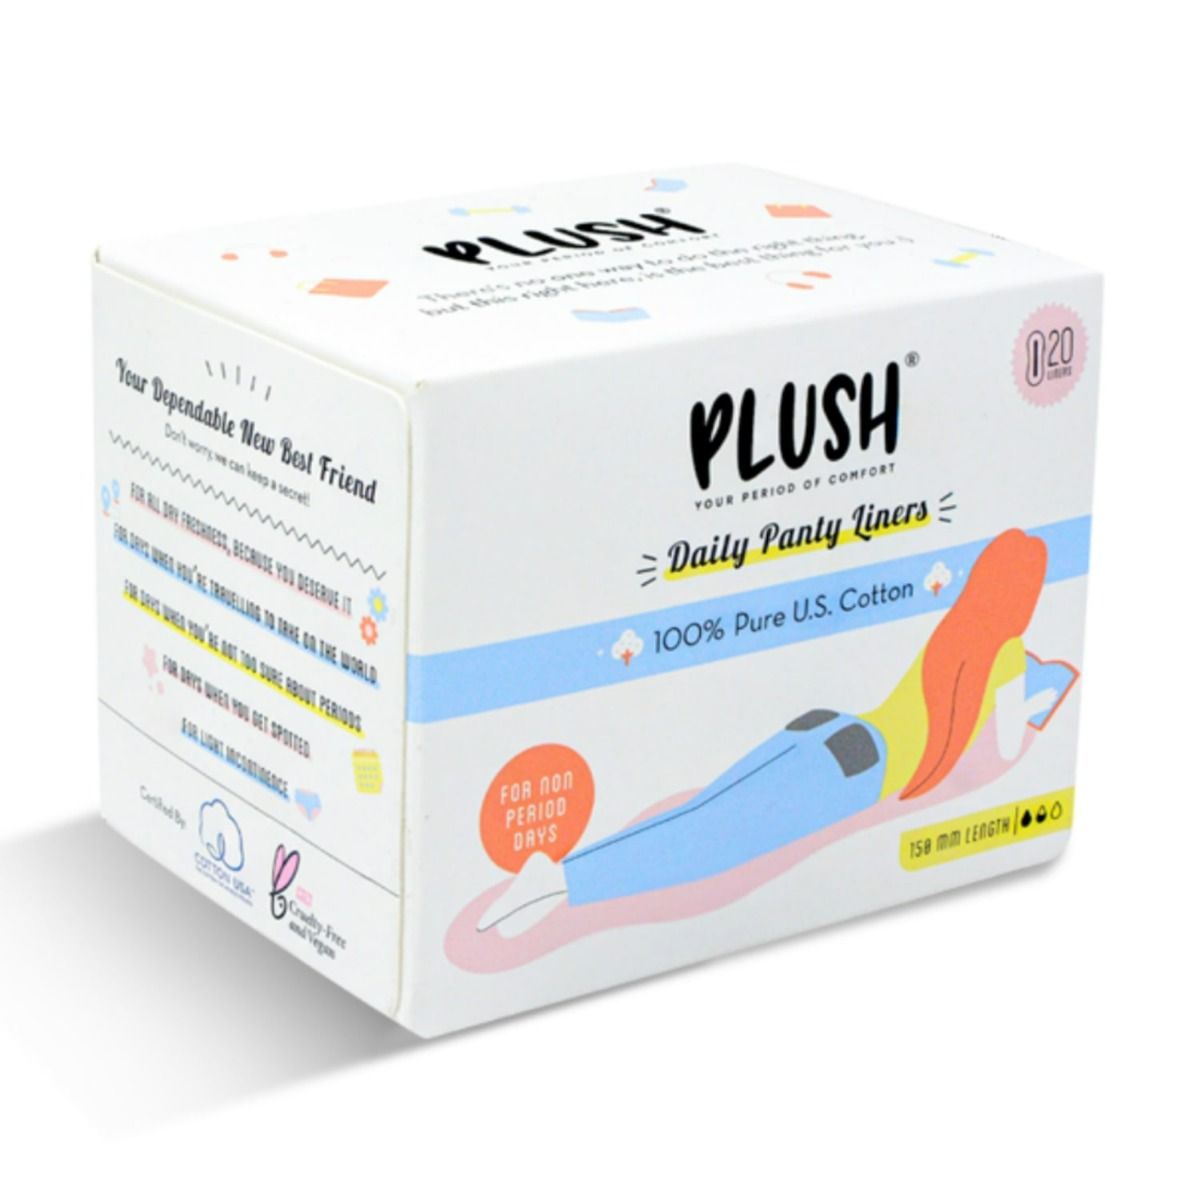 Buy Plush 100% U.S Pure Cotton 158mm Daily Panty Liners,  20 Count Online